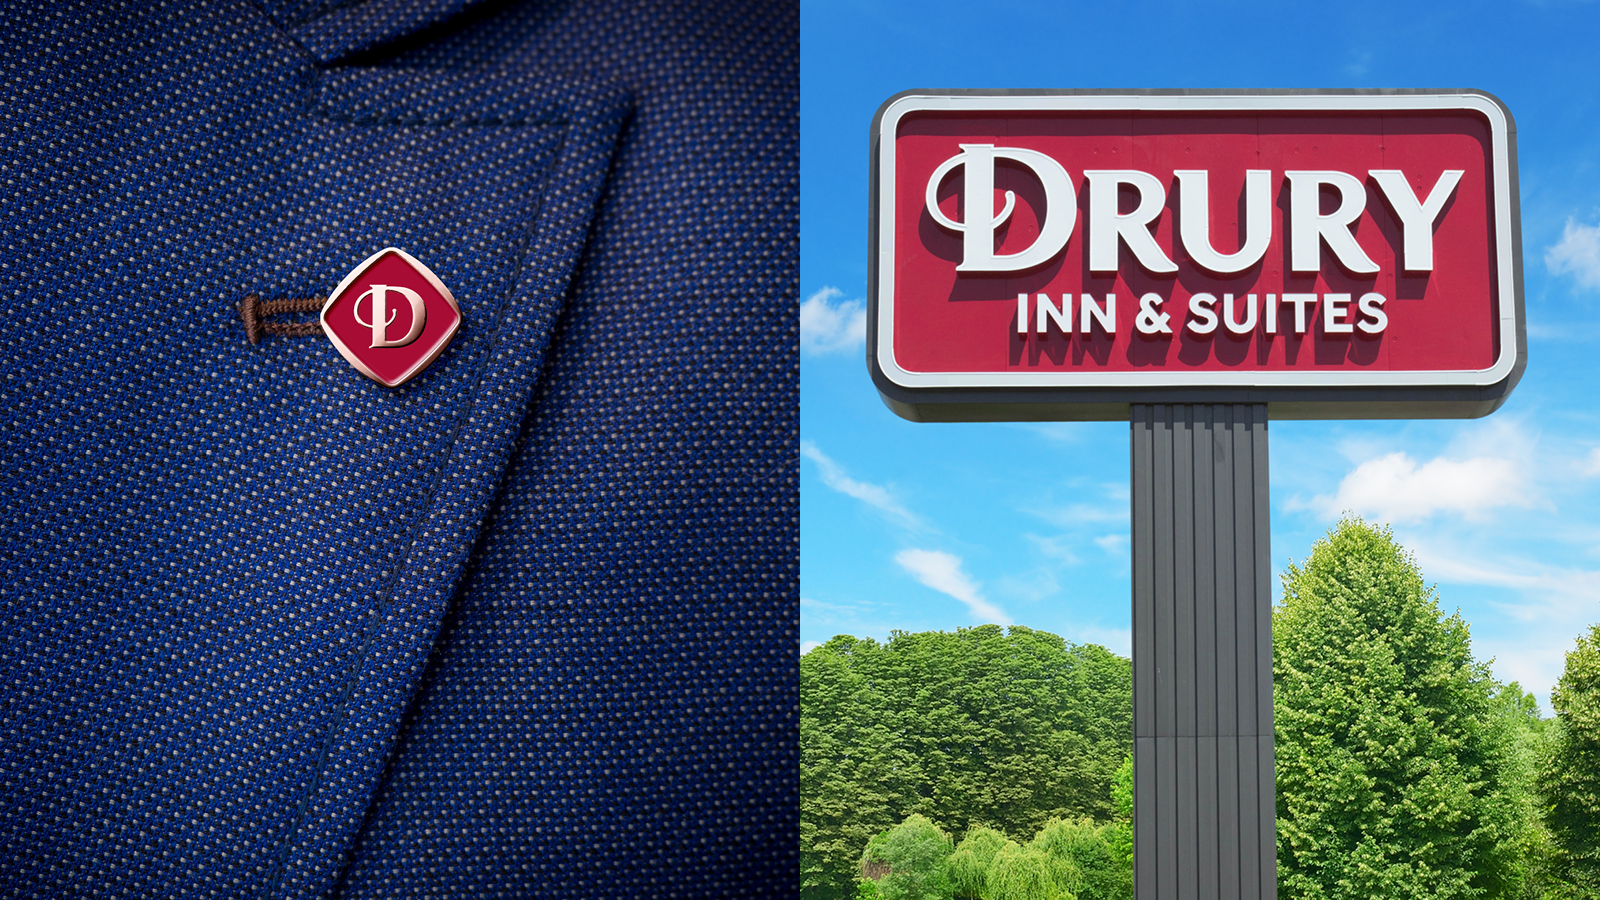 Drury Hotels pin and lollipop sign